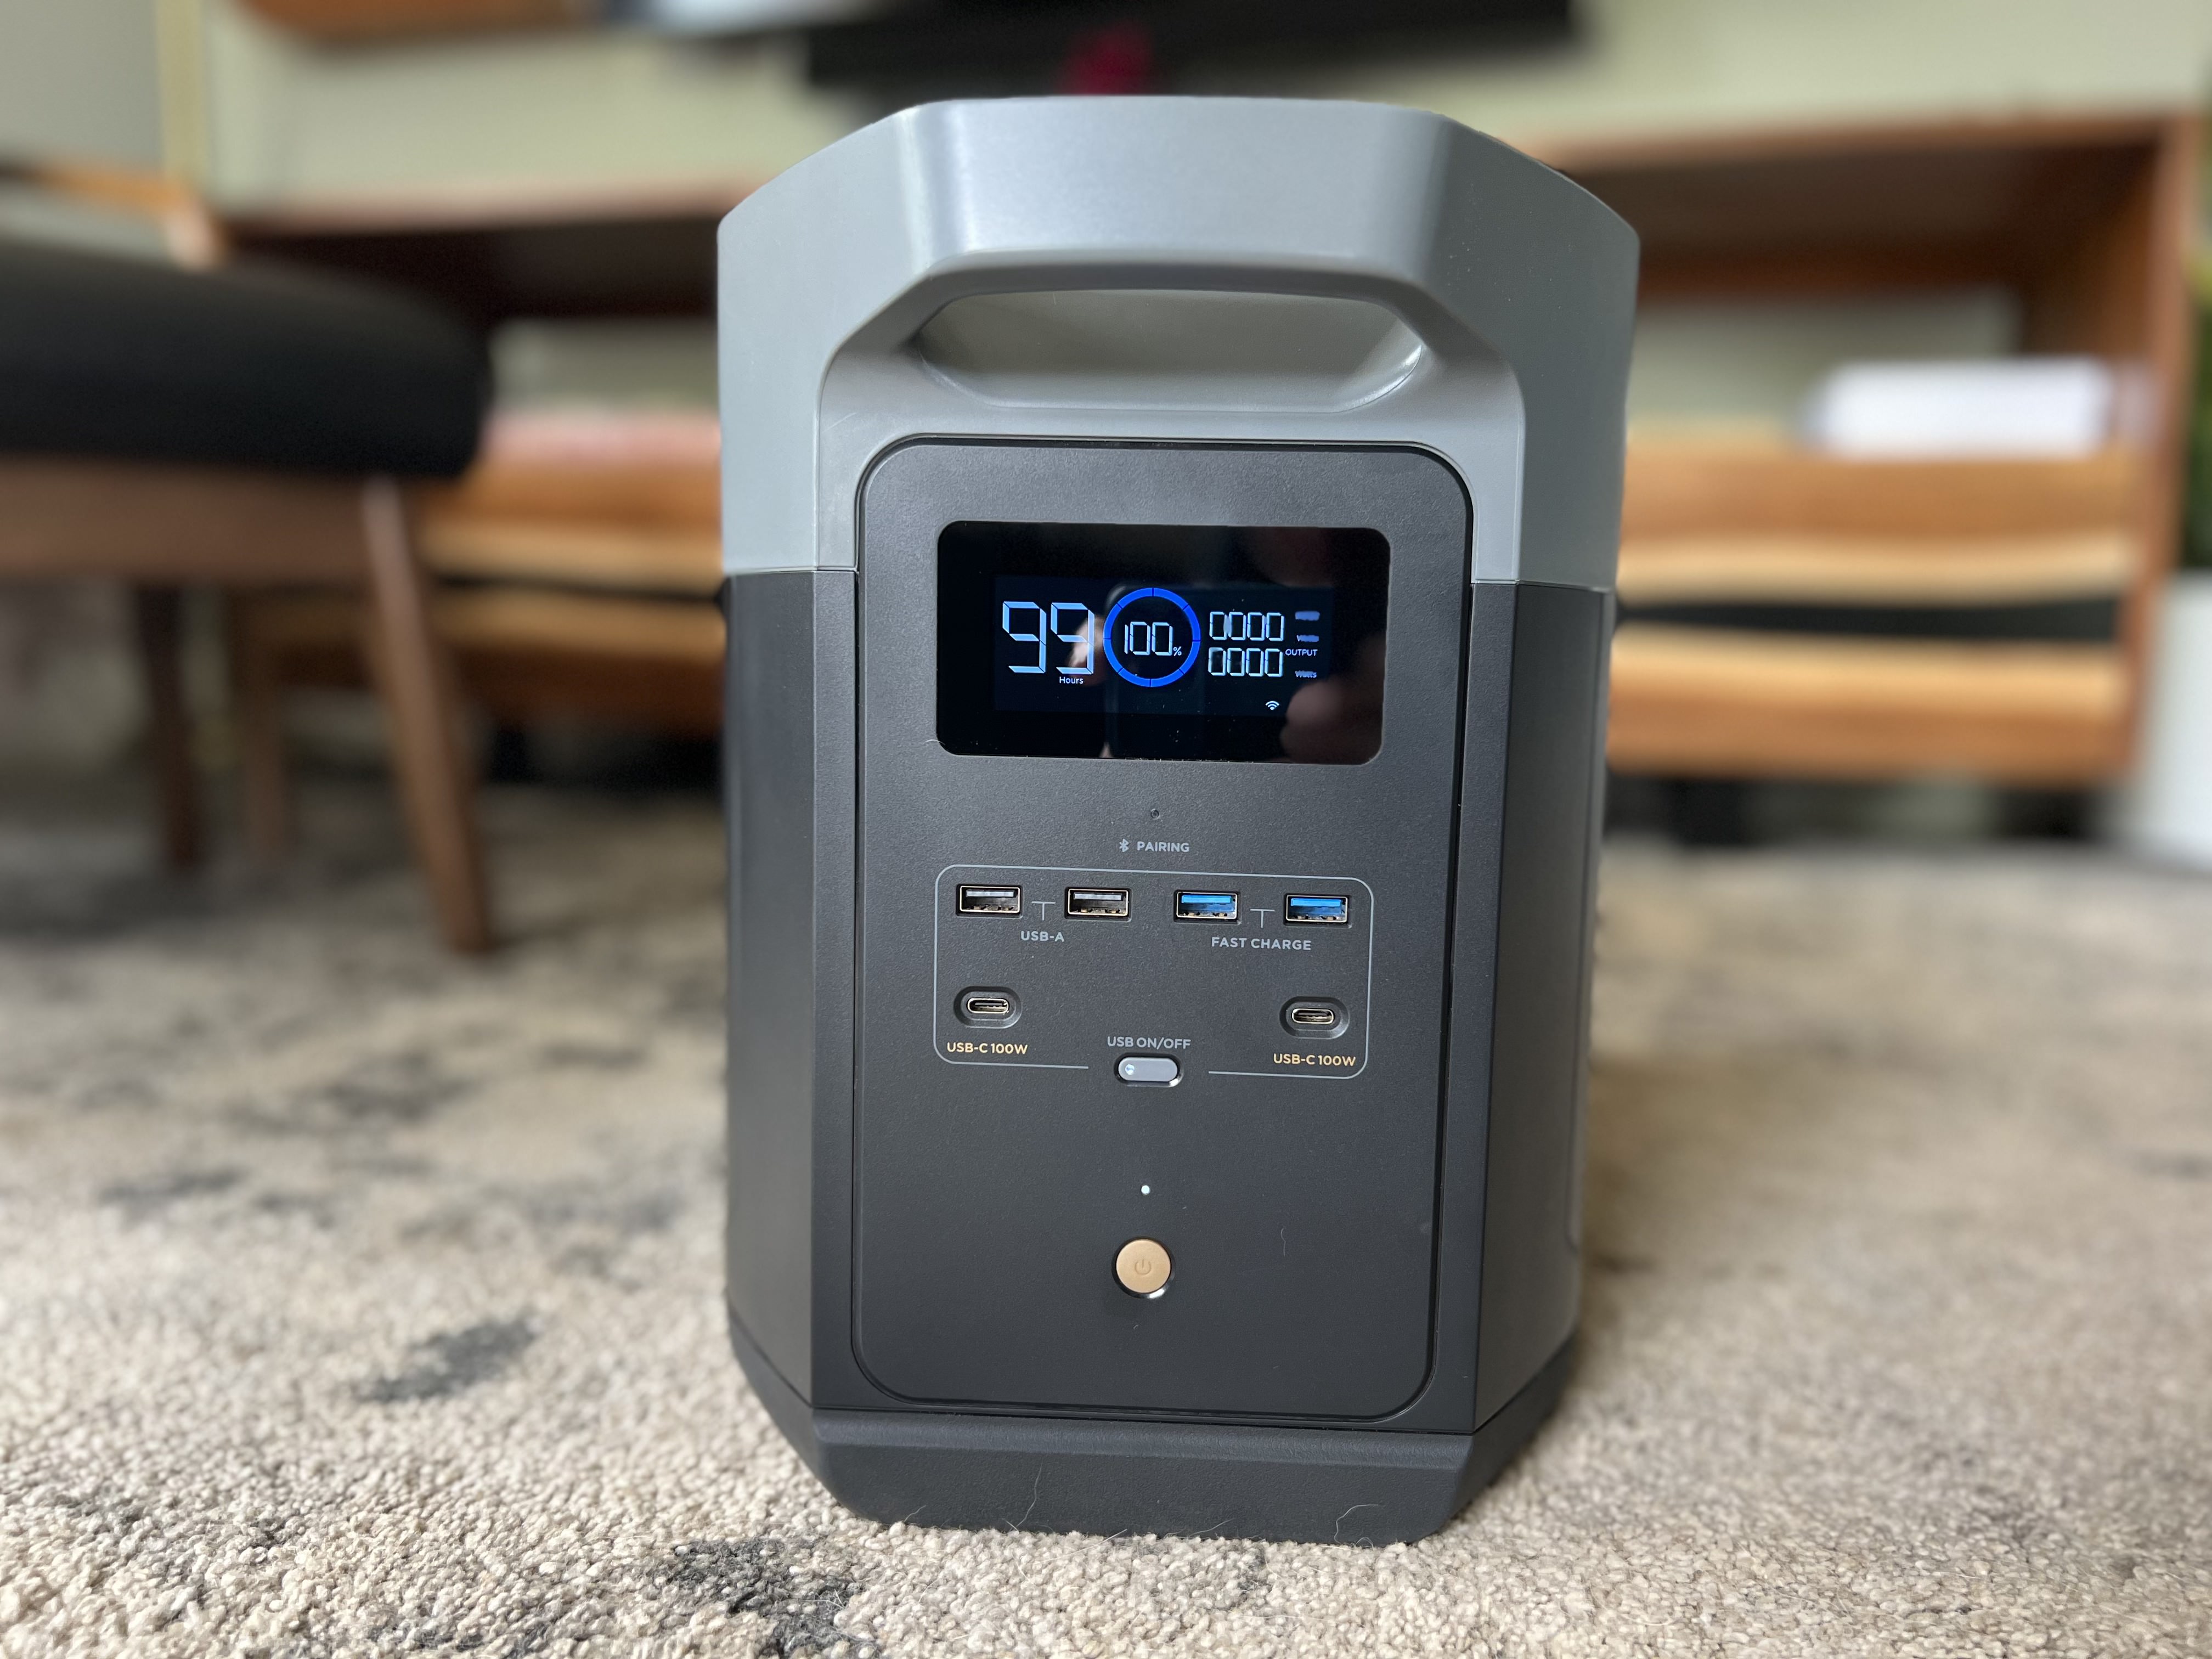 EcoFlow DELTA 2 Max power station review